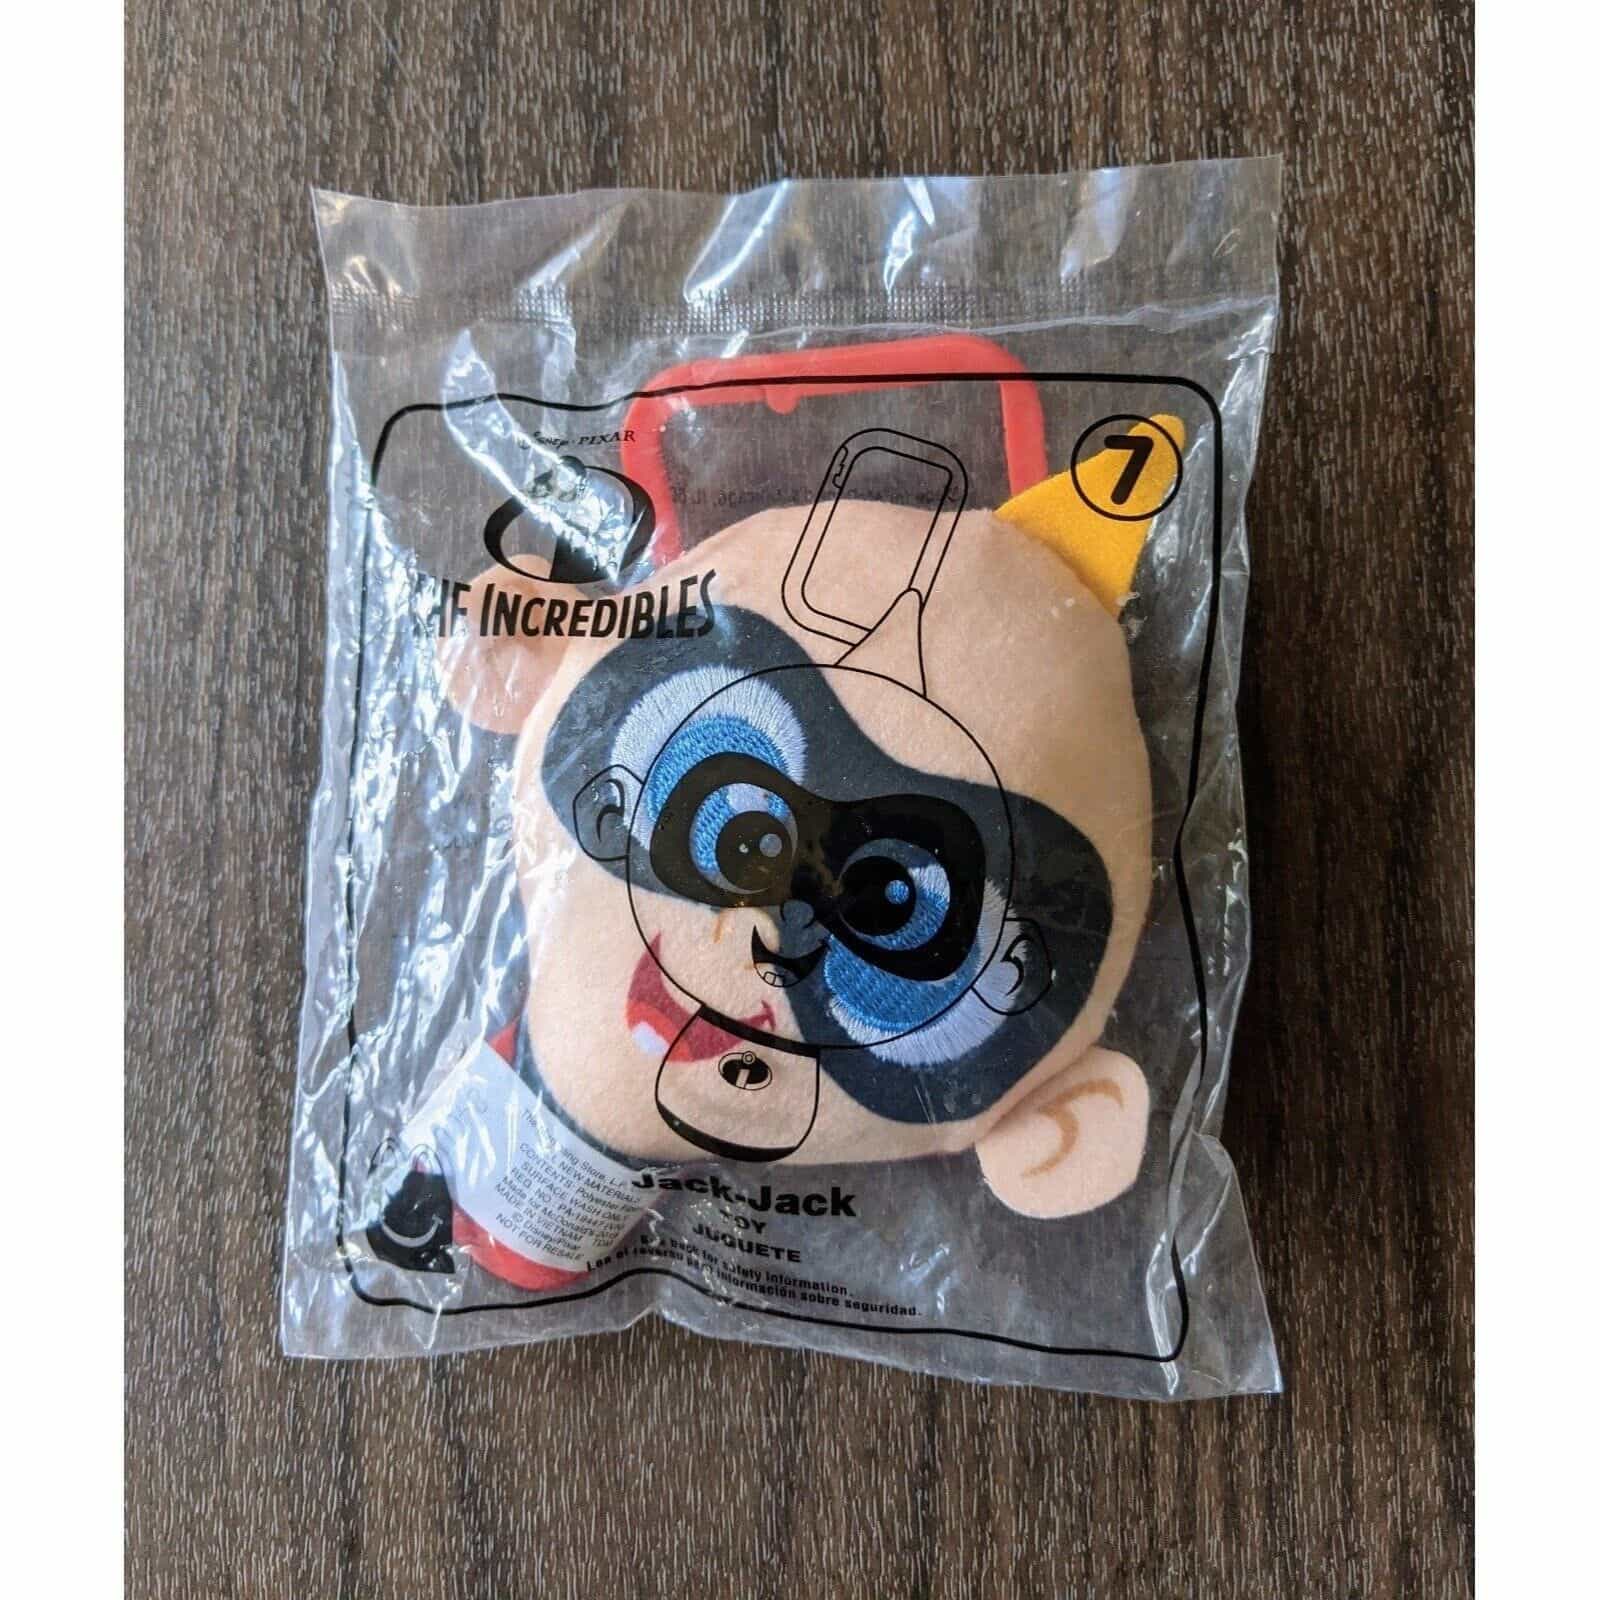 Mcdonalds Happy Meal The Incredibles Jack-Jack Toy